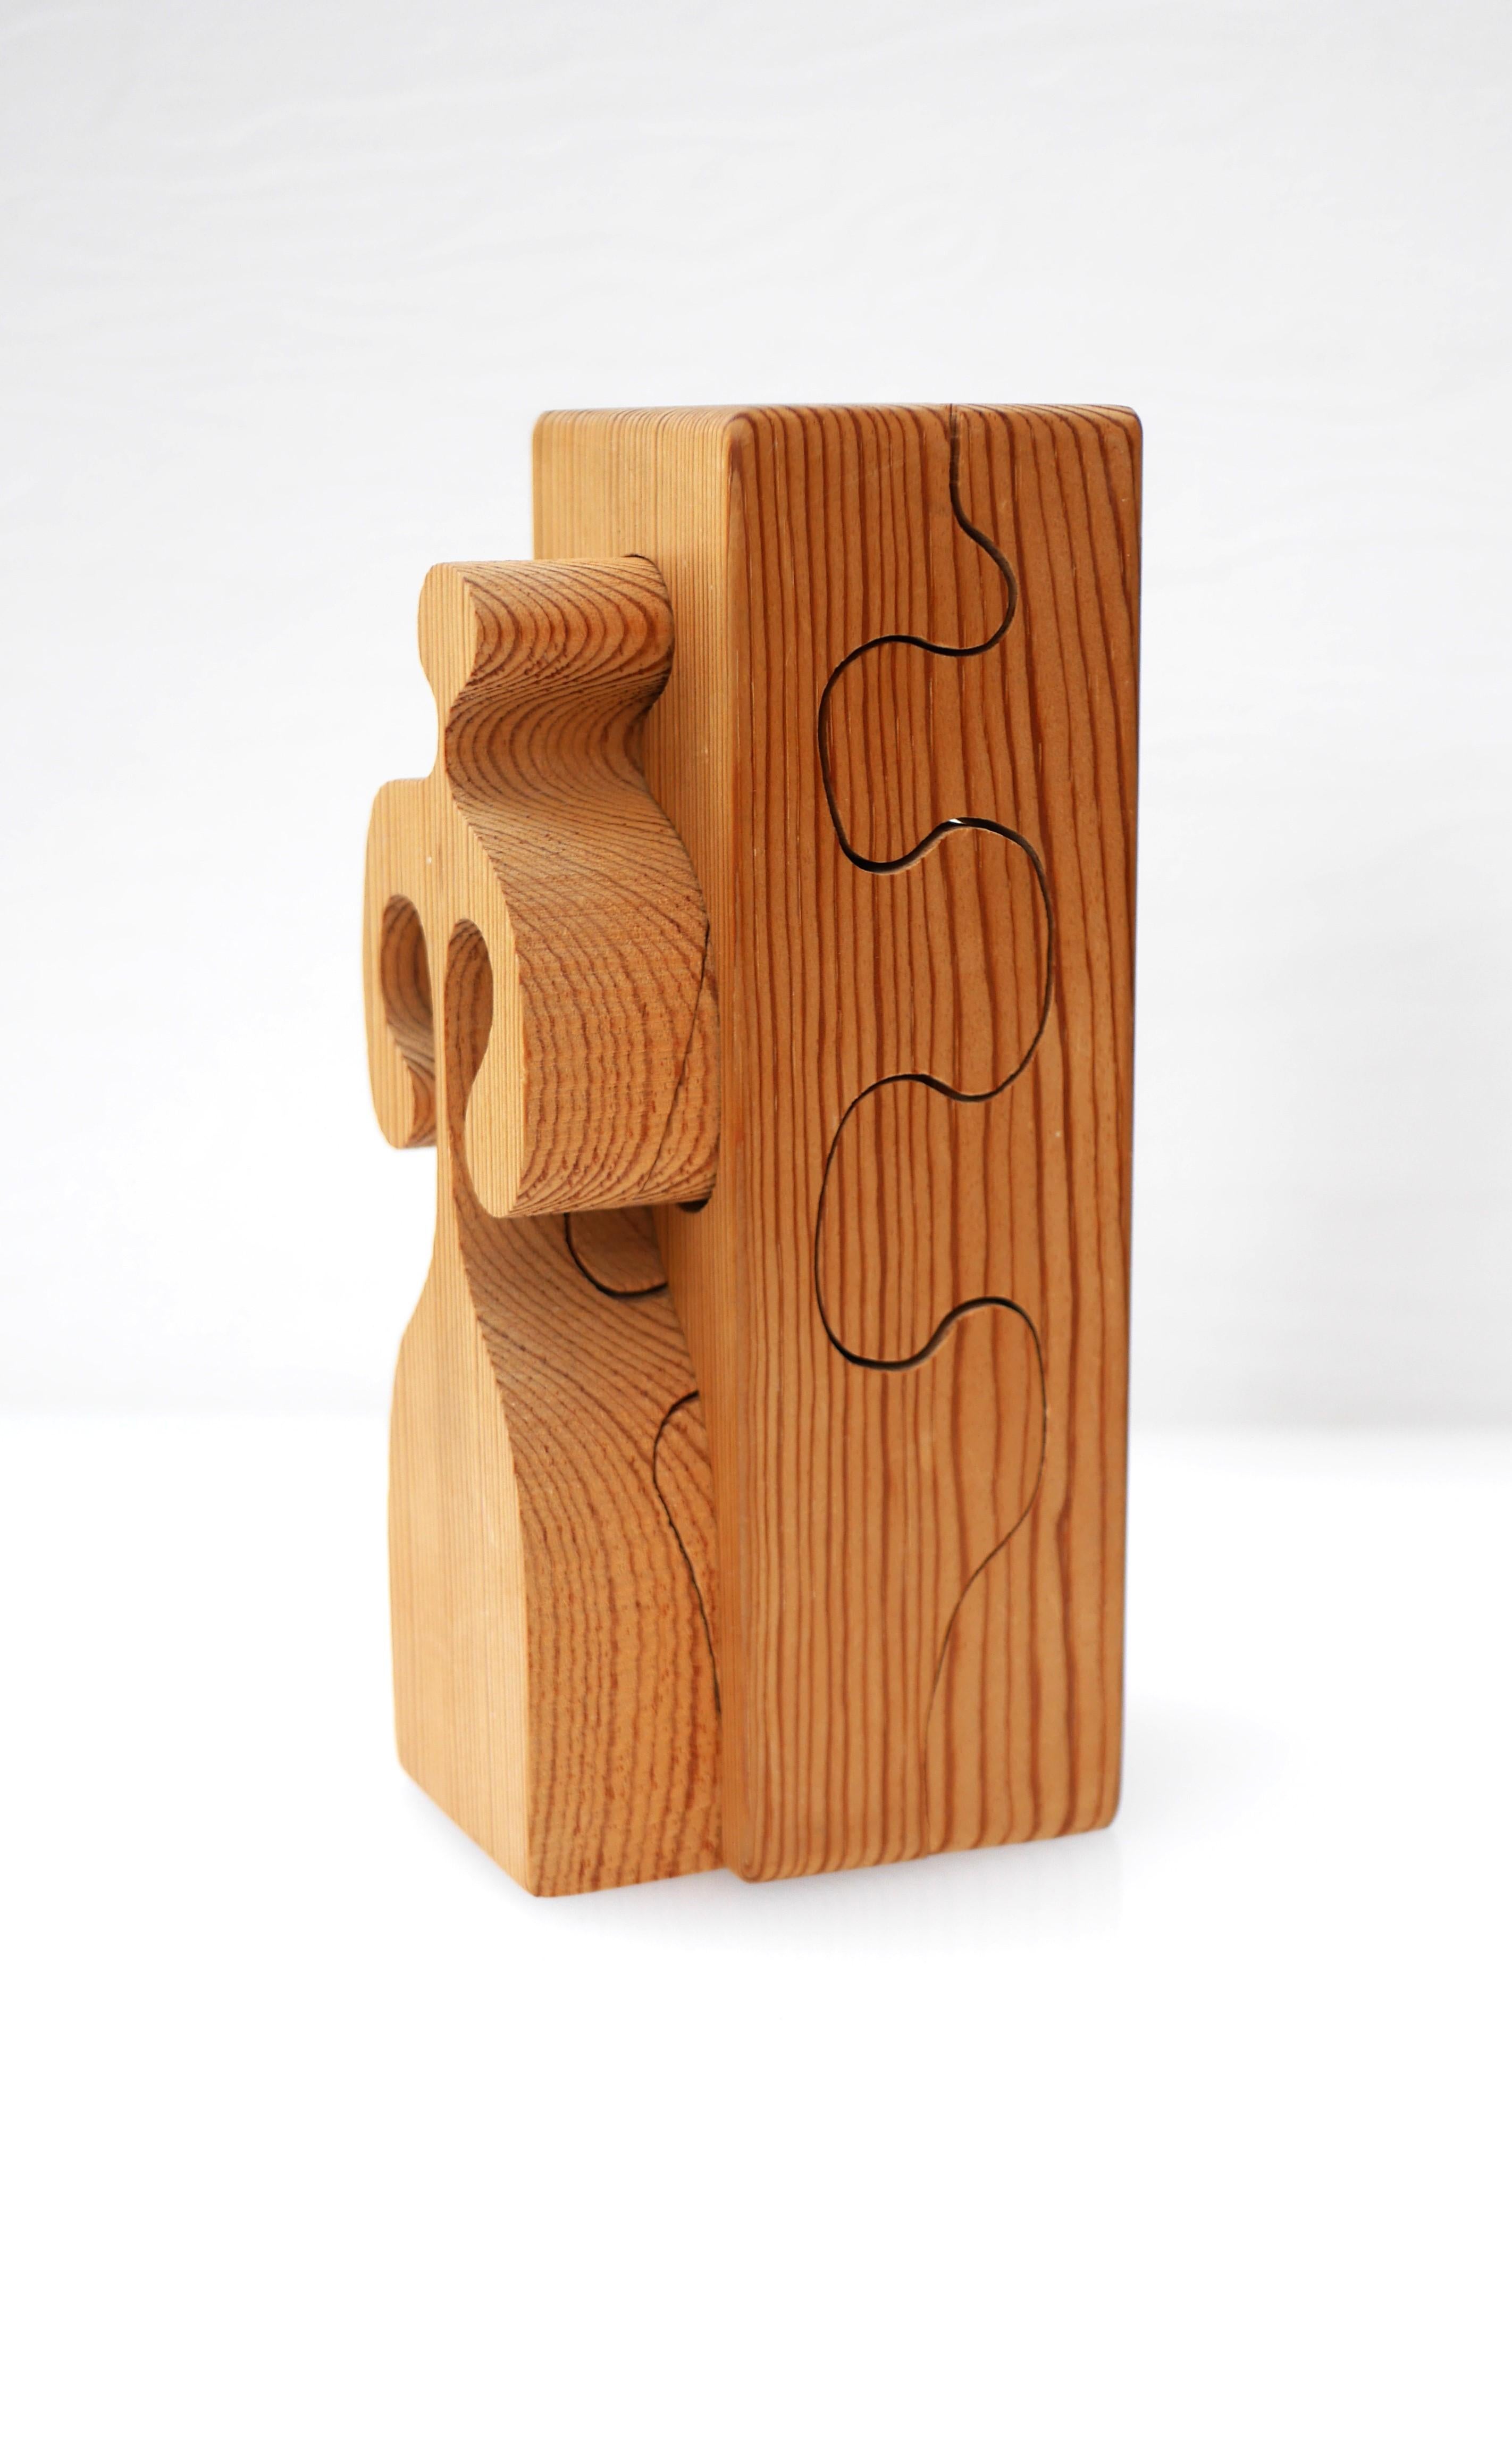 Wooden Puzzle Sculpture by Gunnar Kanevad for Gamla Linköping Sweden, 1962 For Sale 6